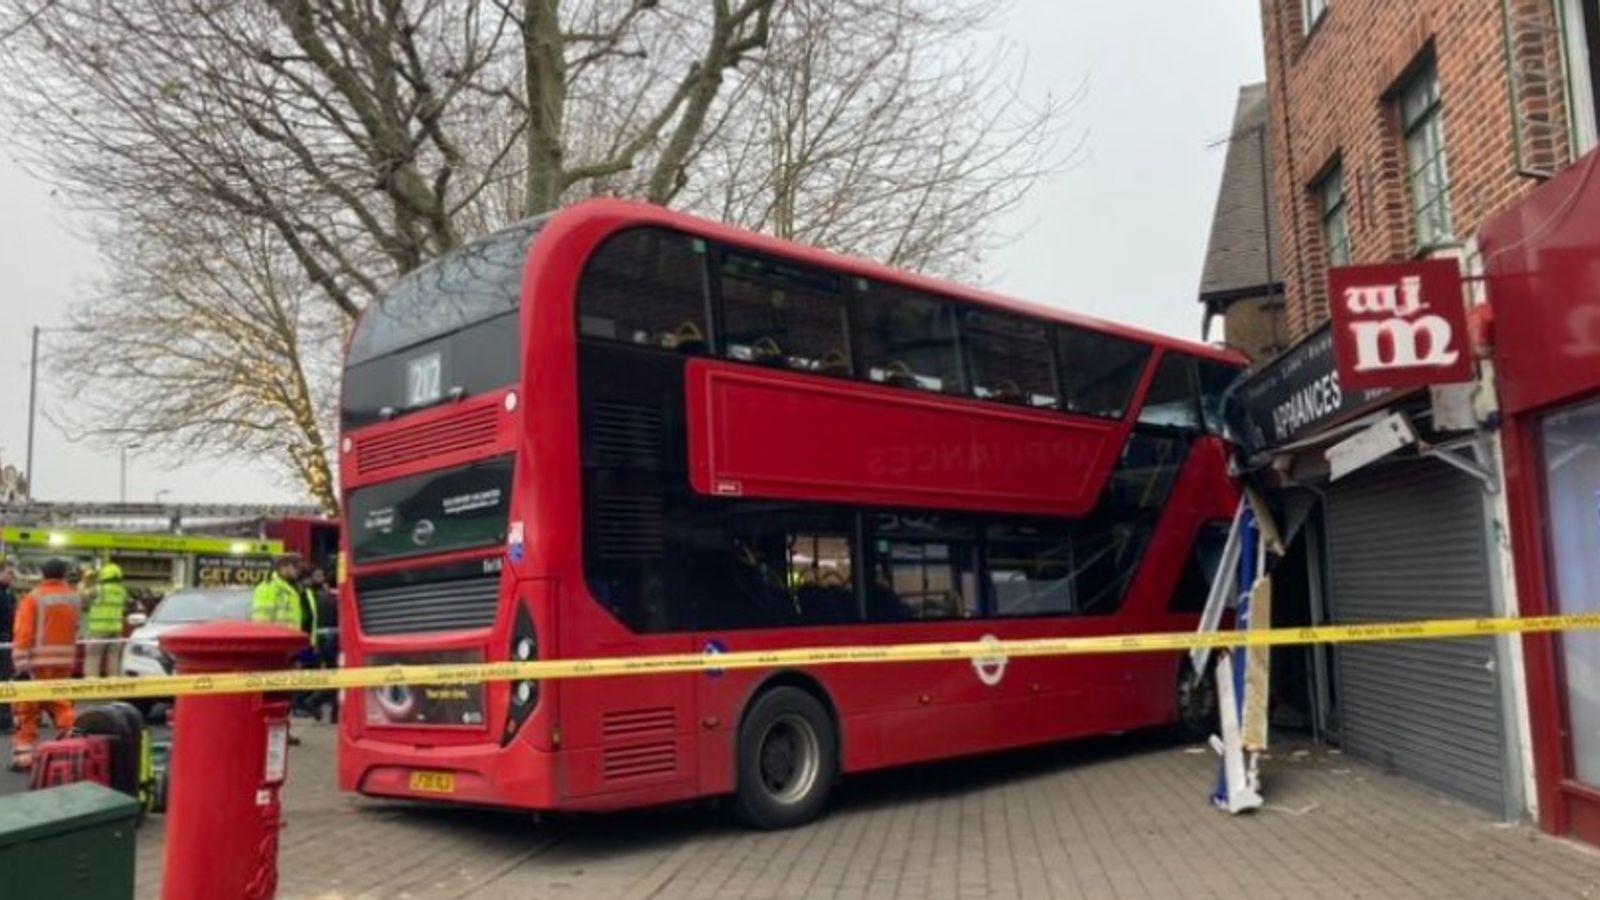 East London: Several injured after double-decker bus crashes into shop